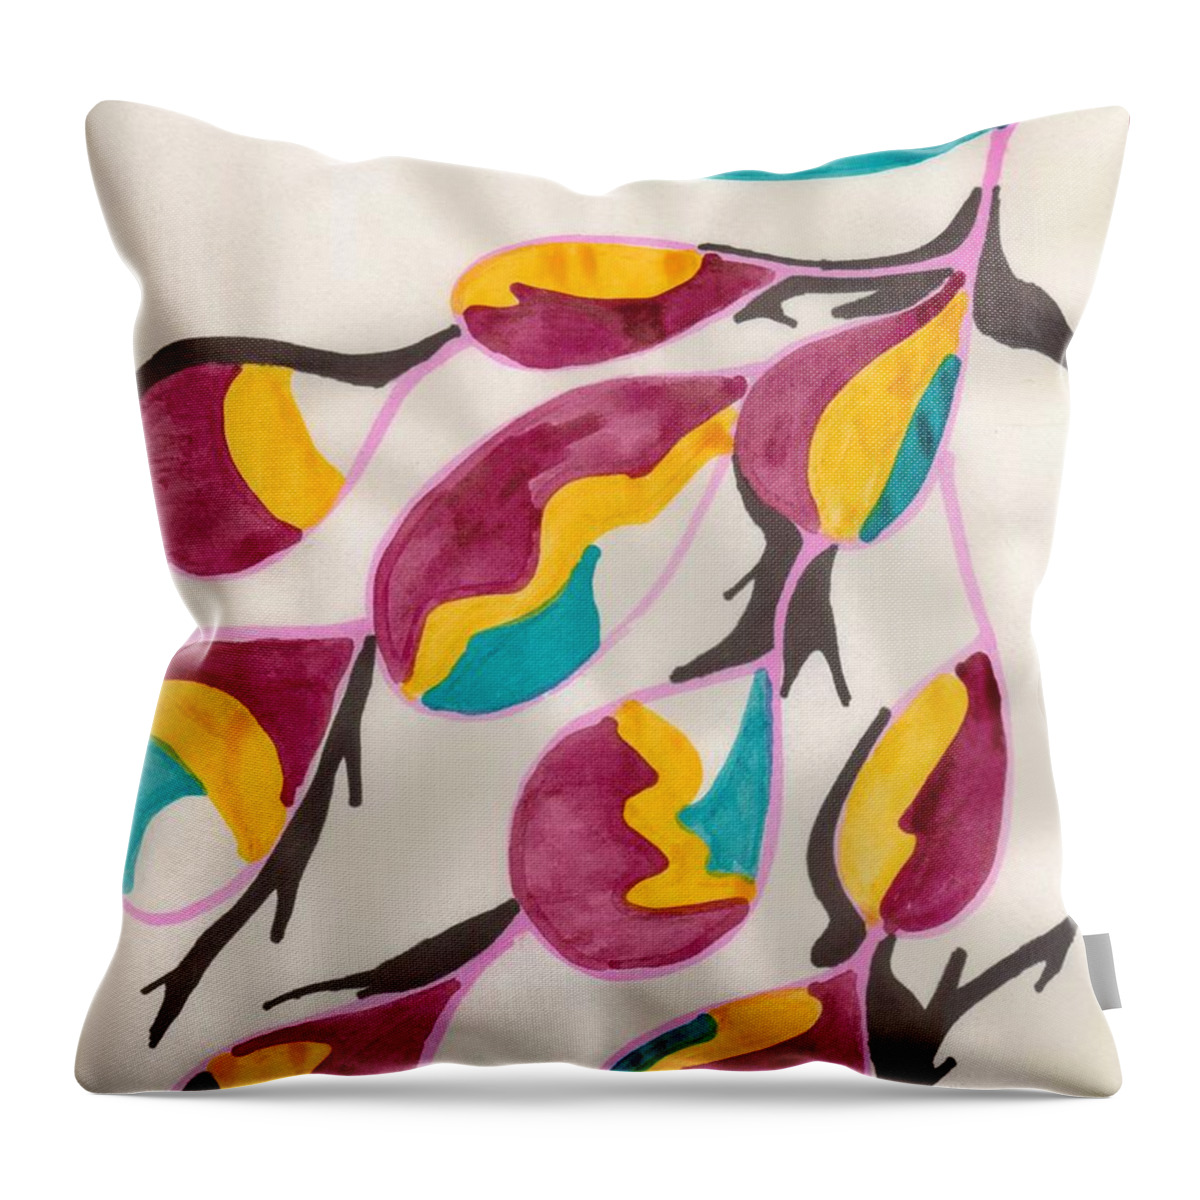 Grapes Throw Pillow featuring the mixed media Wine Grapes by Mary Mikawoz